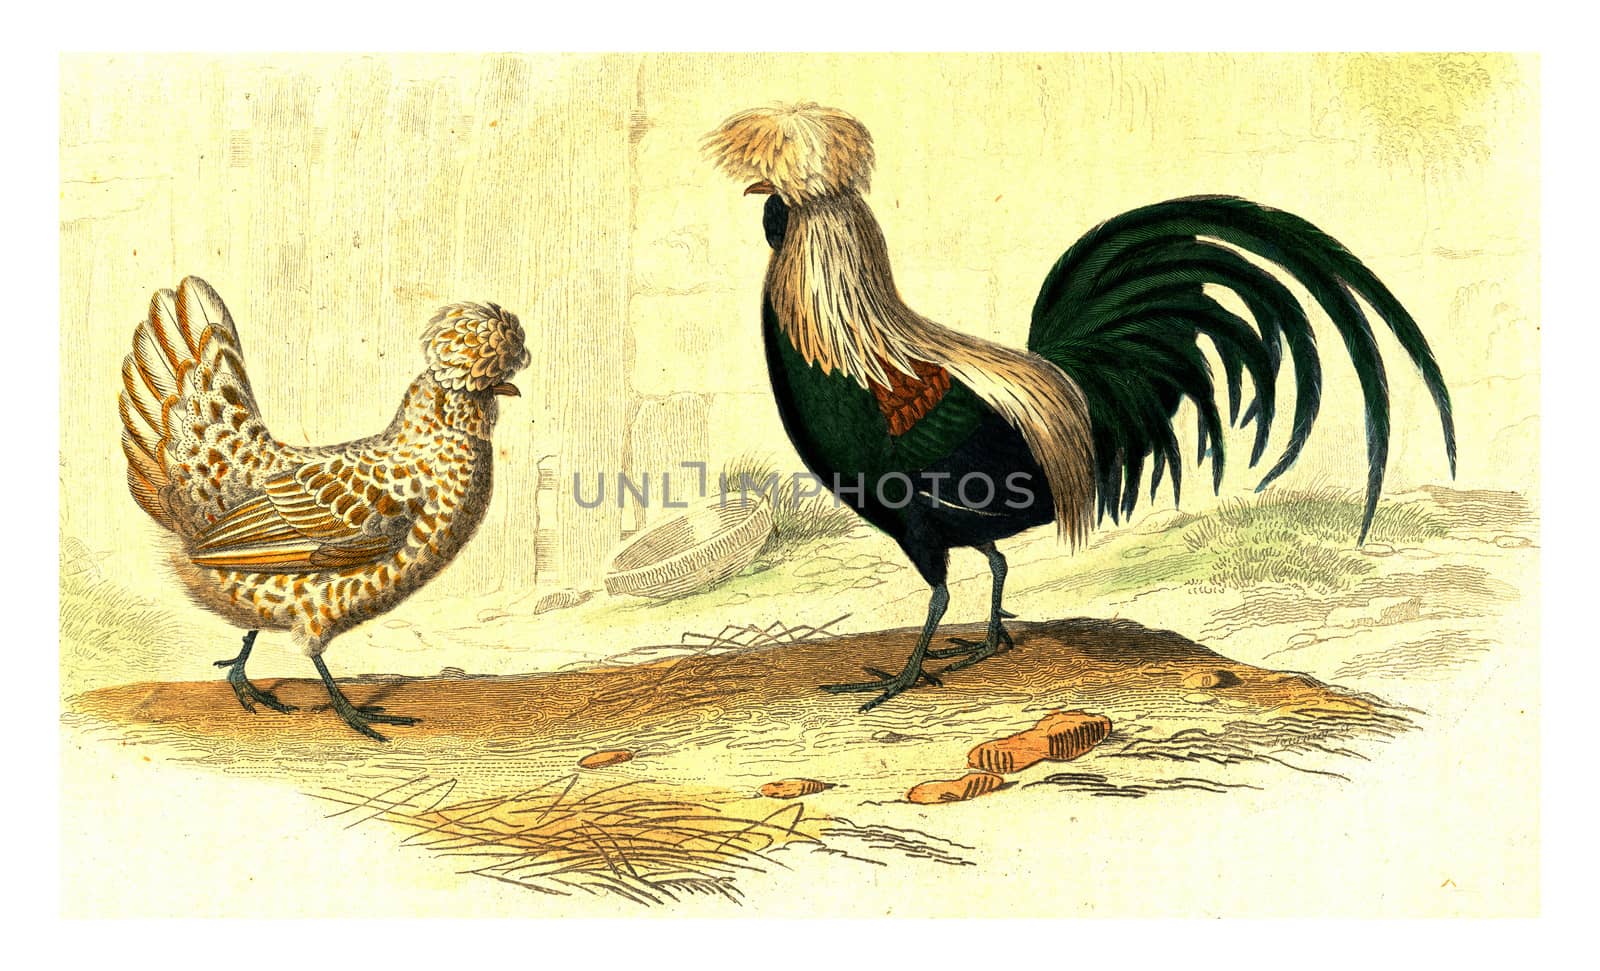 Hooded hen, The rooster crest, vintage engraved illustration. From Buffon Complete Work.

